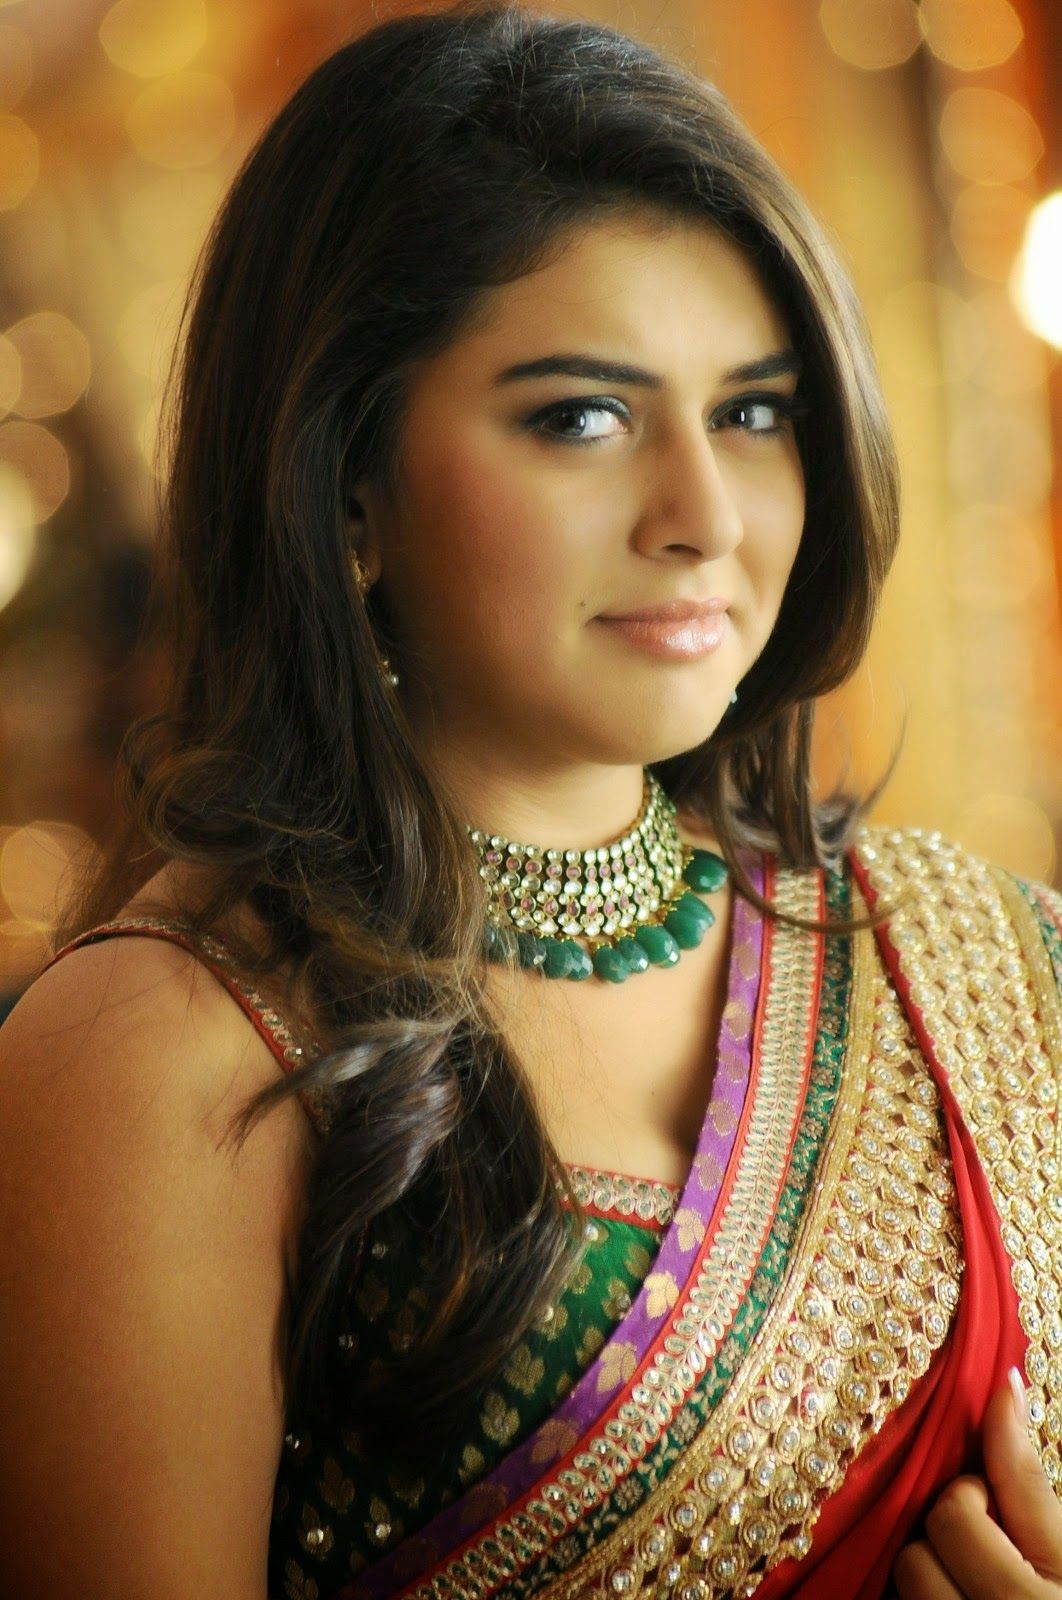 Hansika Motwani, Hansika Motwani Gallery, Hansika Motwani Images, Hansika Motwani Wall Paper, Hansika Motwani WallPaper, Hansika Motwani Wall Paper HD, Hansika Motwani Wallpaper HD, Hansika Motwani, Hansika Motwani Hot, Hansika Motwani Sexy, Hansika Motwani Tamil Actress, Hansika Motwani Talugu Actress, Hansika Motwani Malayalam Actress, Hansika Motwani Bollywood Actress, Hansika Motwani Tollywood Actress, Hansika Motwani Kollywood Actress, Hansika Motwani Mollywood Actress, Hansika Motwani Actress Troll, Hansika Motwani Actress Trending, Hansika Motwani Glamour, Hansika Motwani Classic, Hansika Motwani Traditional, Hansika Motwani Saree, Hansika Motwani Wall Paper, Hansika Motwani Photos, Hansika Motwani Bio Data, Hansika Motwani Profile, Hansika Motwani Age, Hansika Motwani Height, Hansika Motwani Biography, Hansika Motwani Latest Photos Images